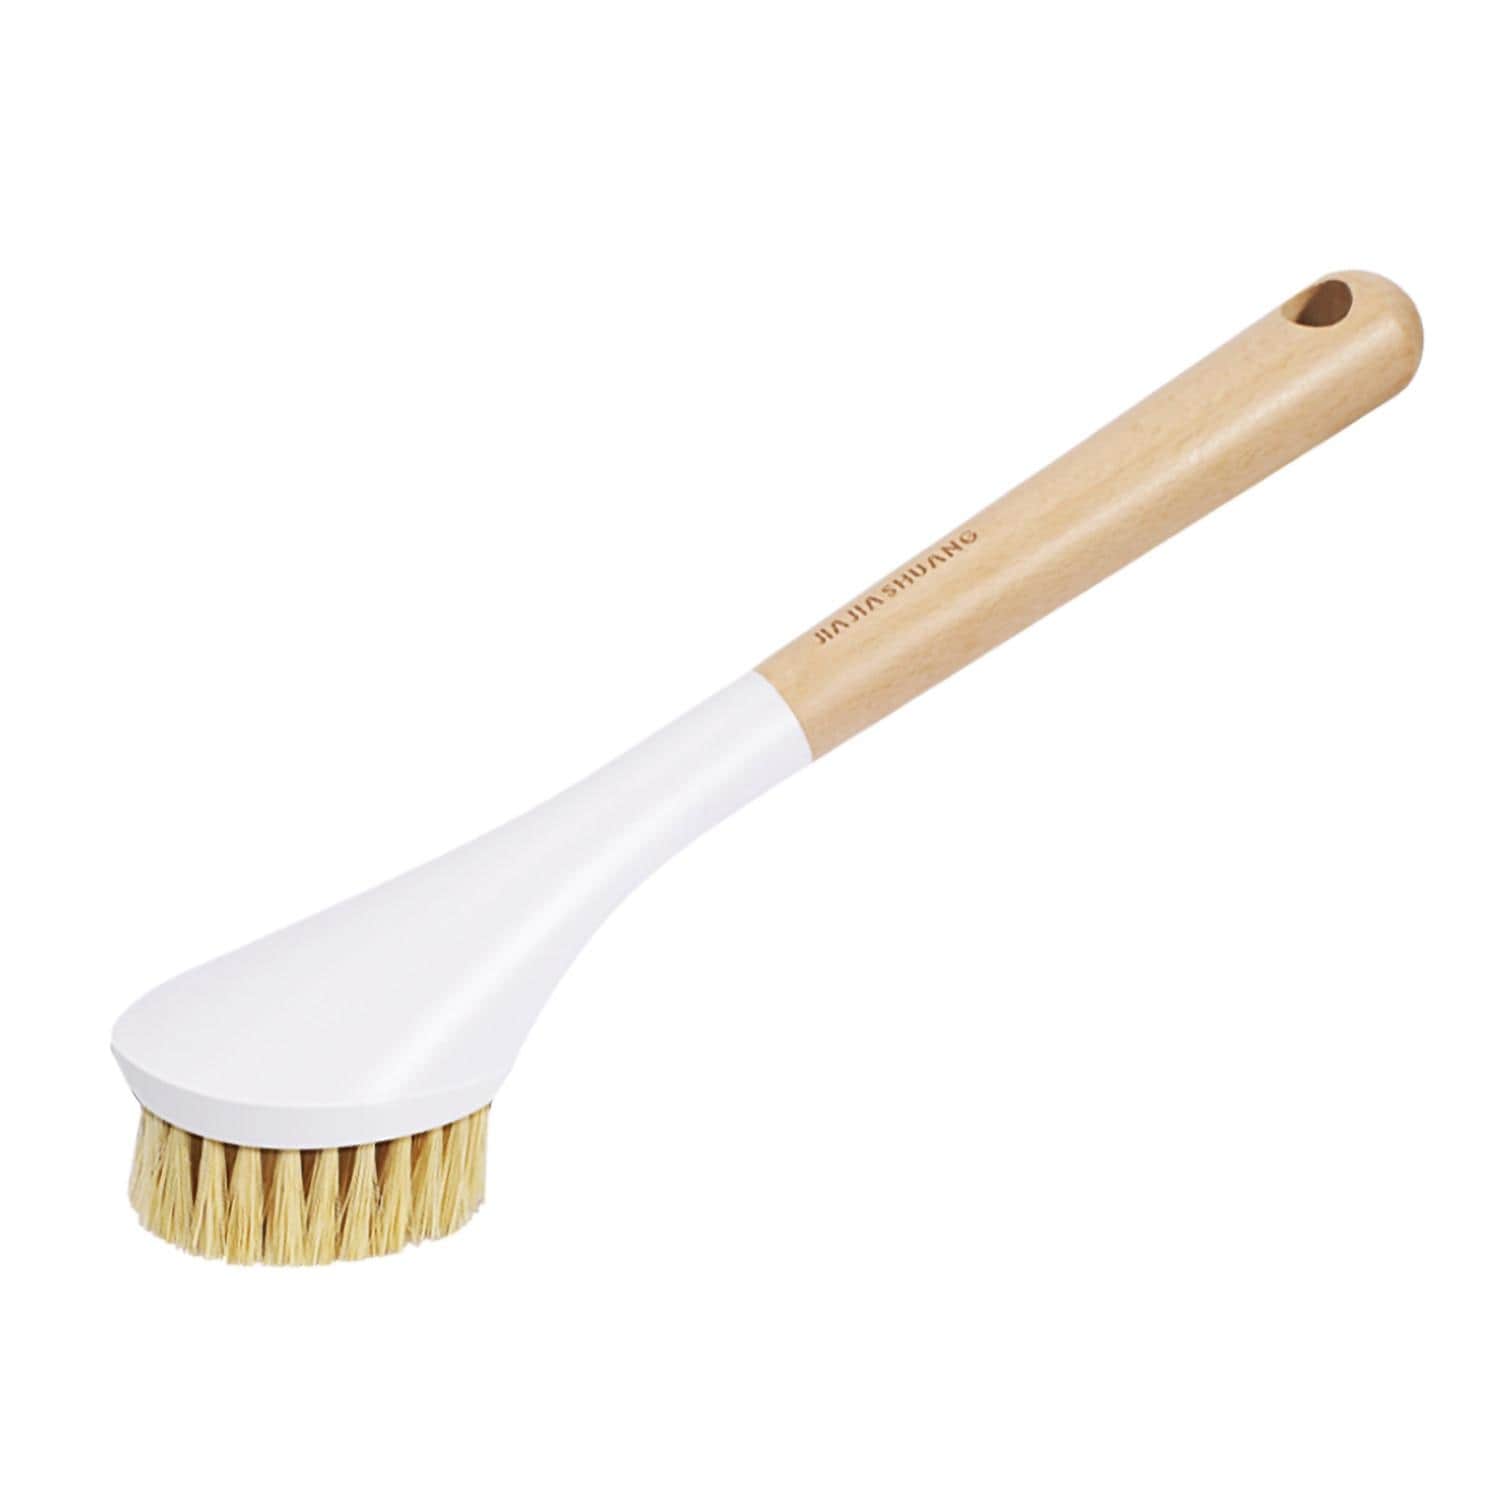 https://ak1.ostkcdn.com/images/products/is/images/direct/1db86ebb3061579c47d2afbdf75d65bcb8a8aed8/Kitchen-Dish-Brush-Beech-Handle-Cleaning-Brush-For-Pans-Pots-Sink-Cleaning.jpg